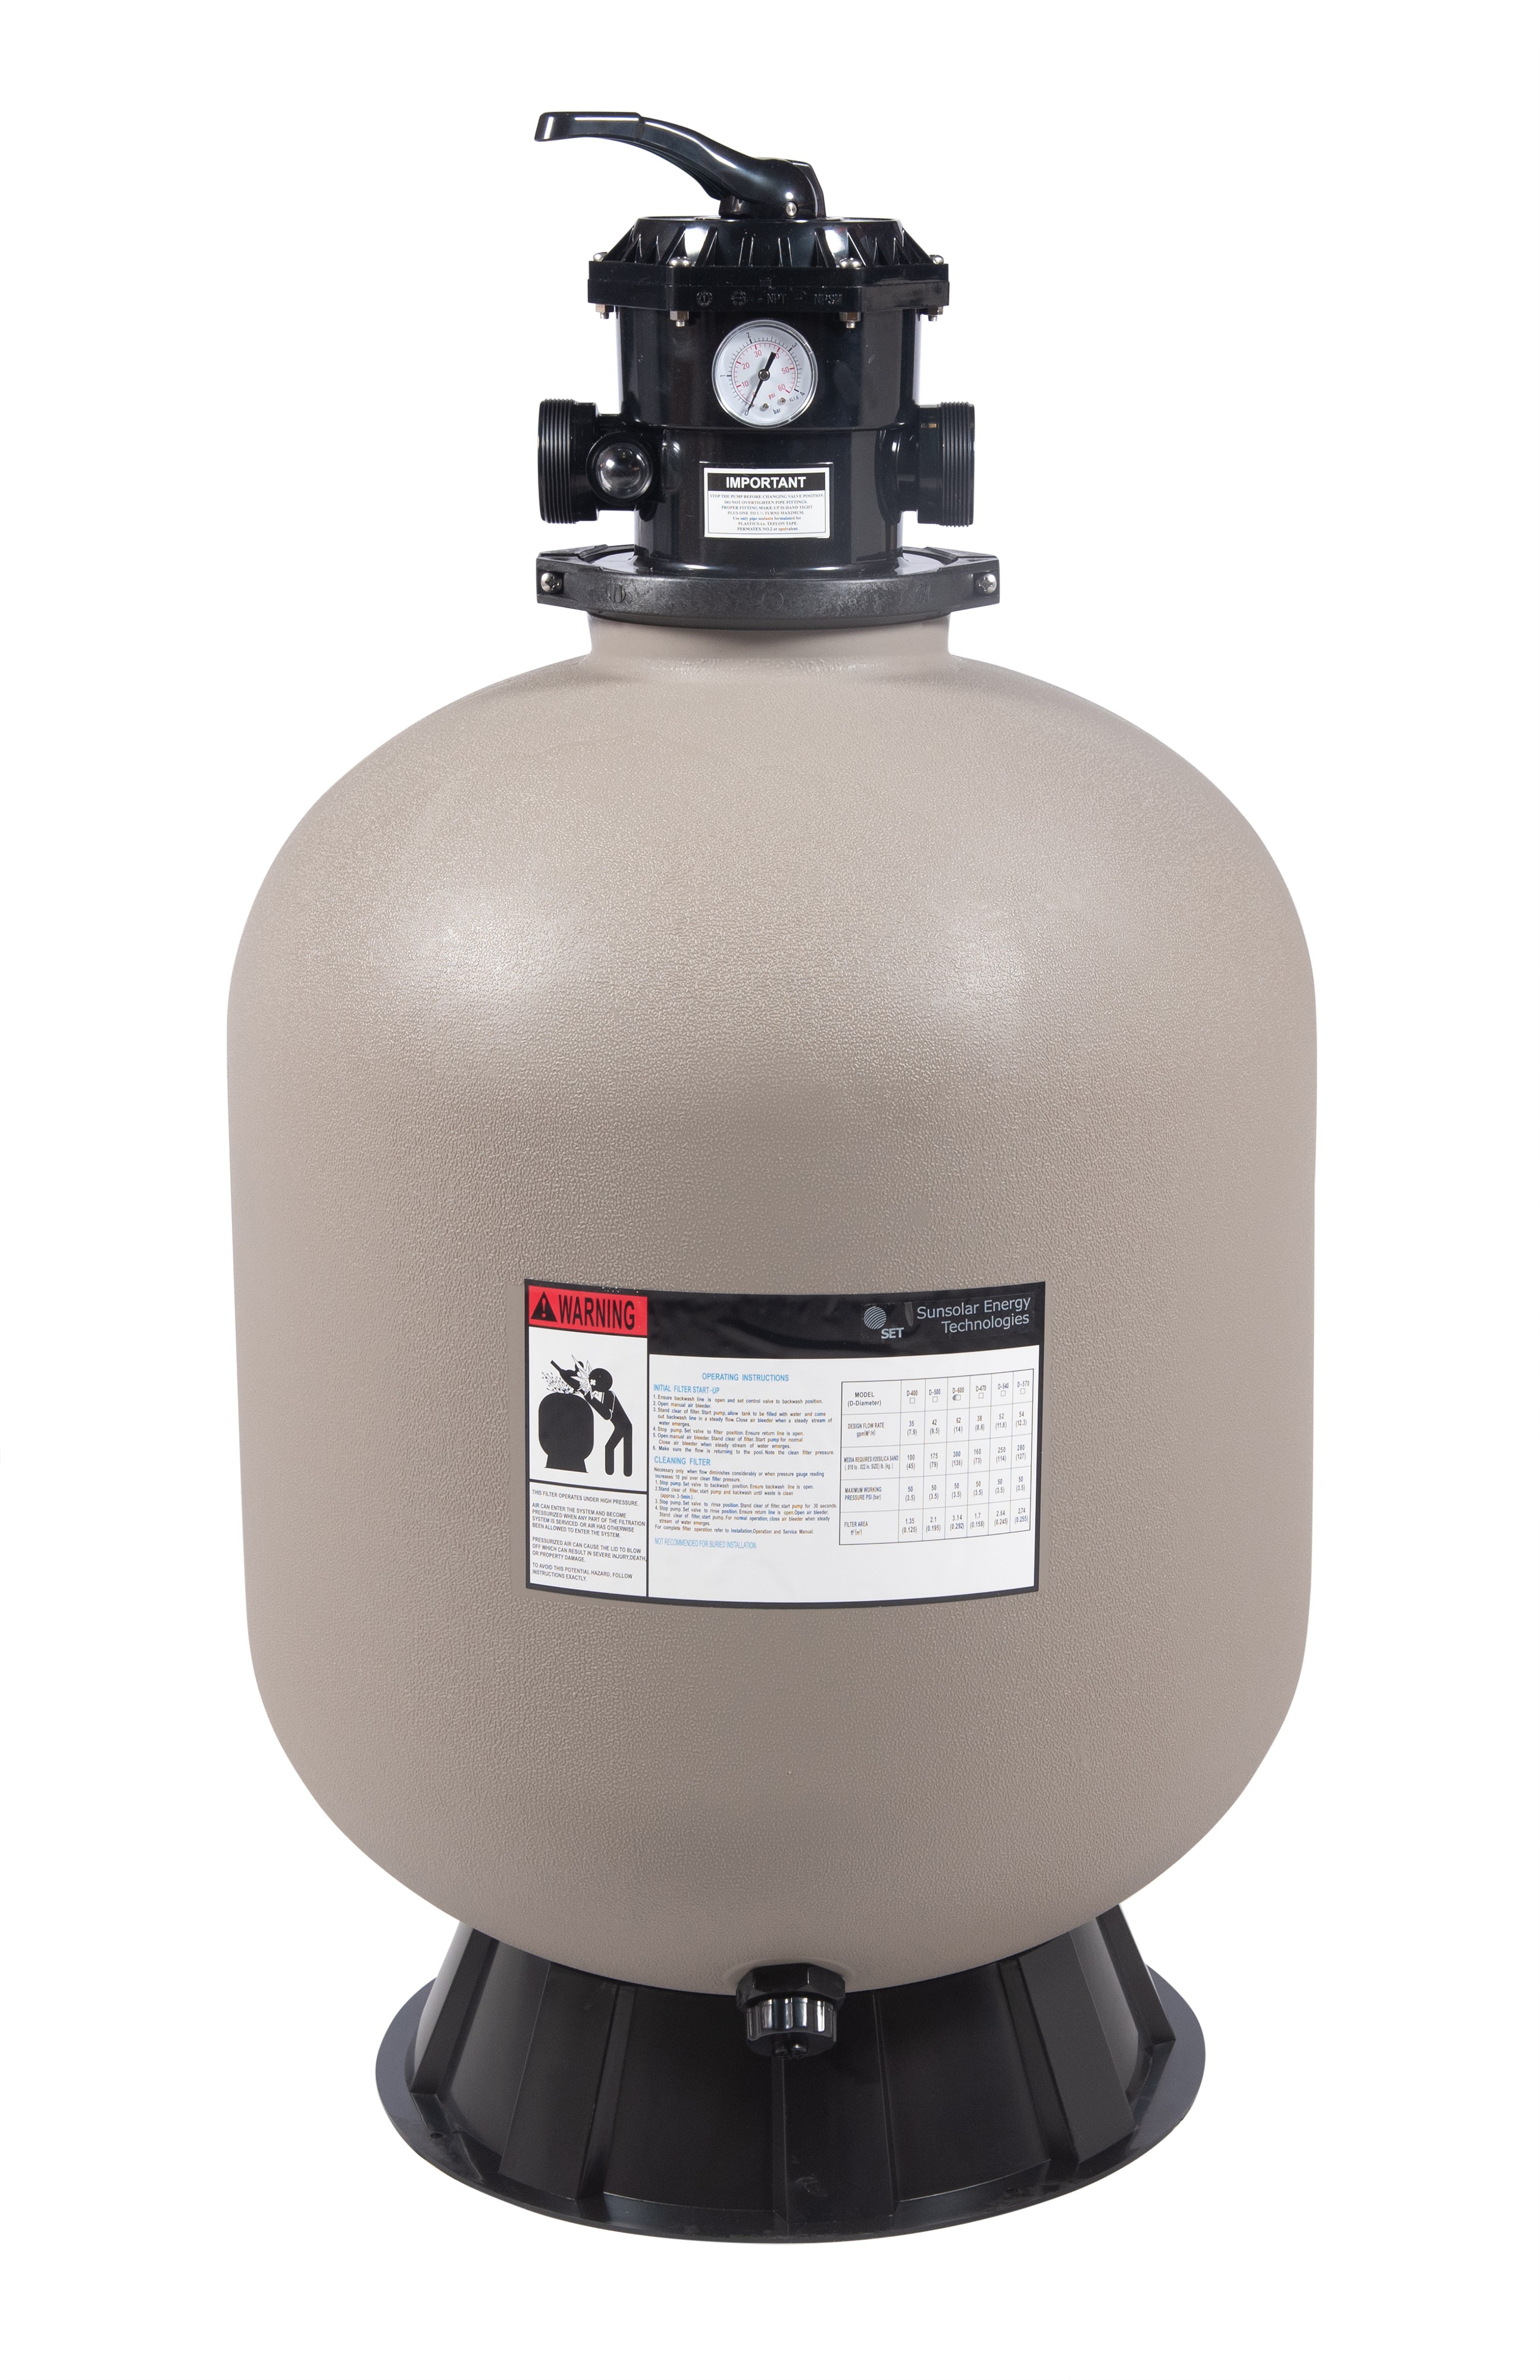 Sand Filter for Above-Ground Swimming Pool - 24 inch diameter